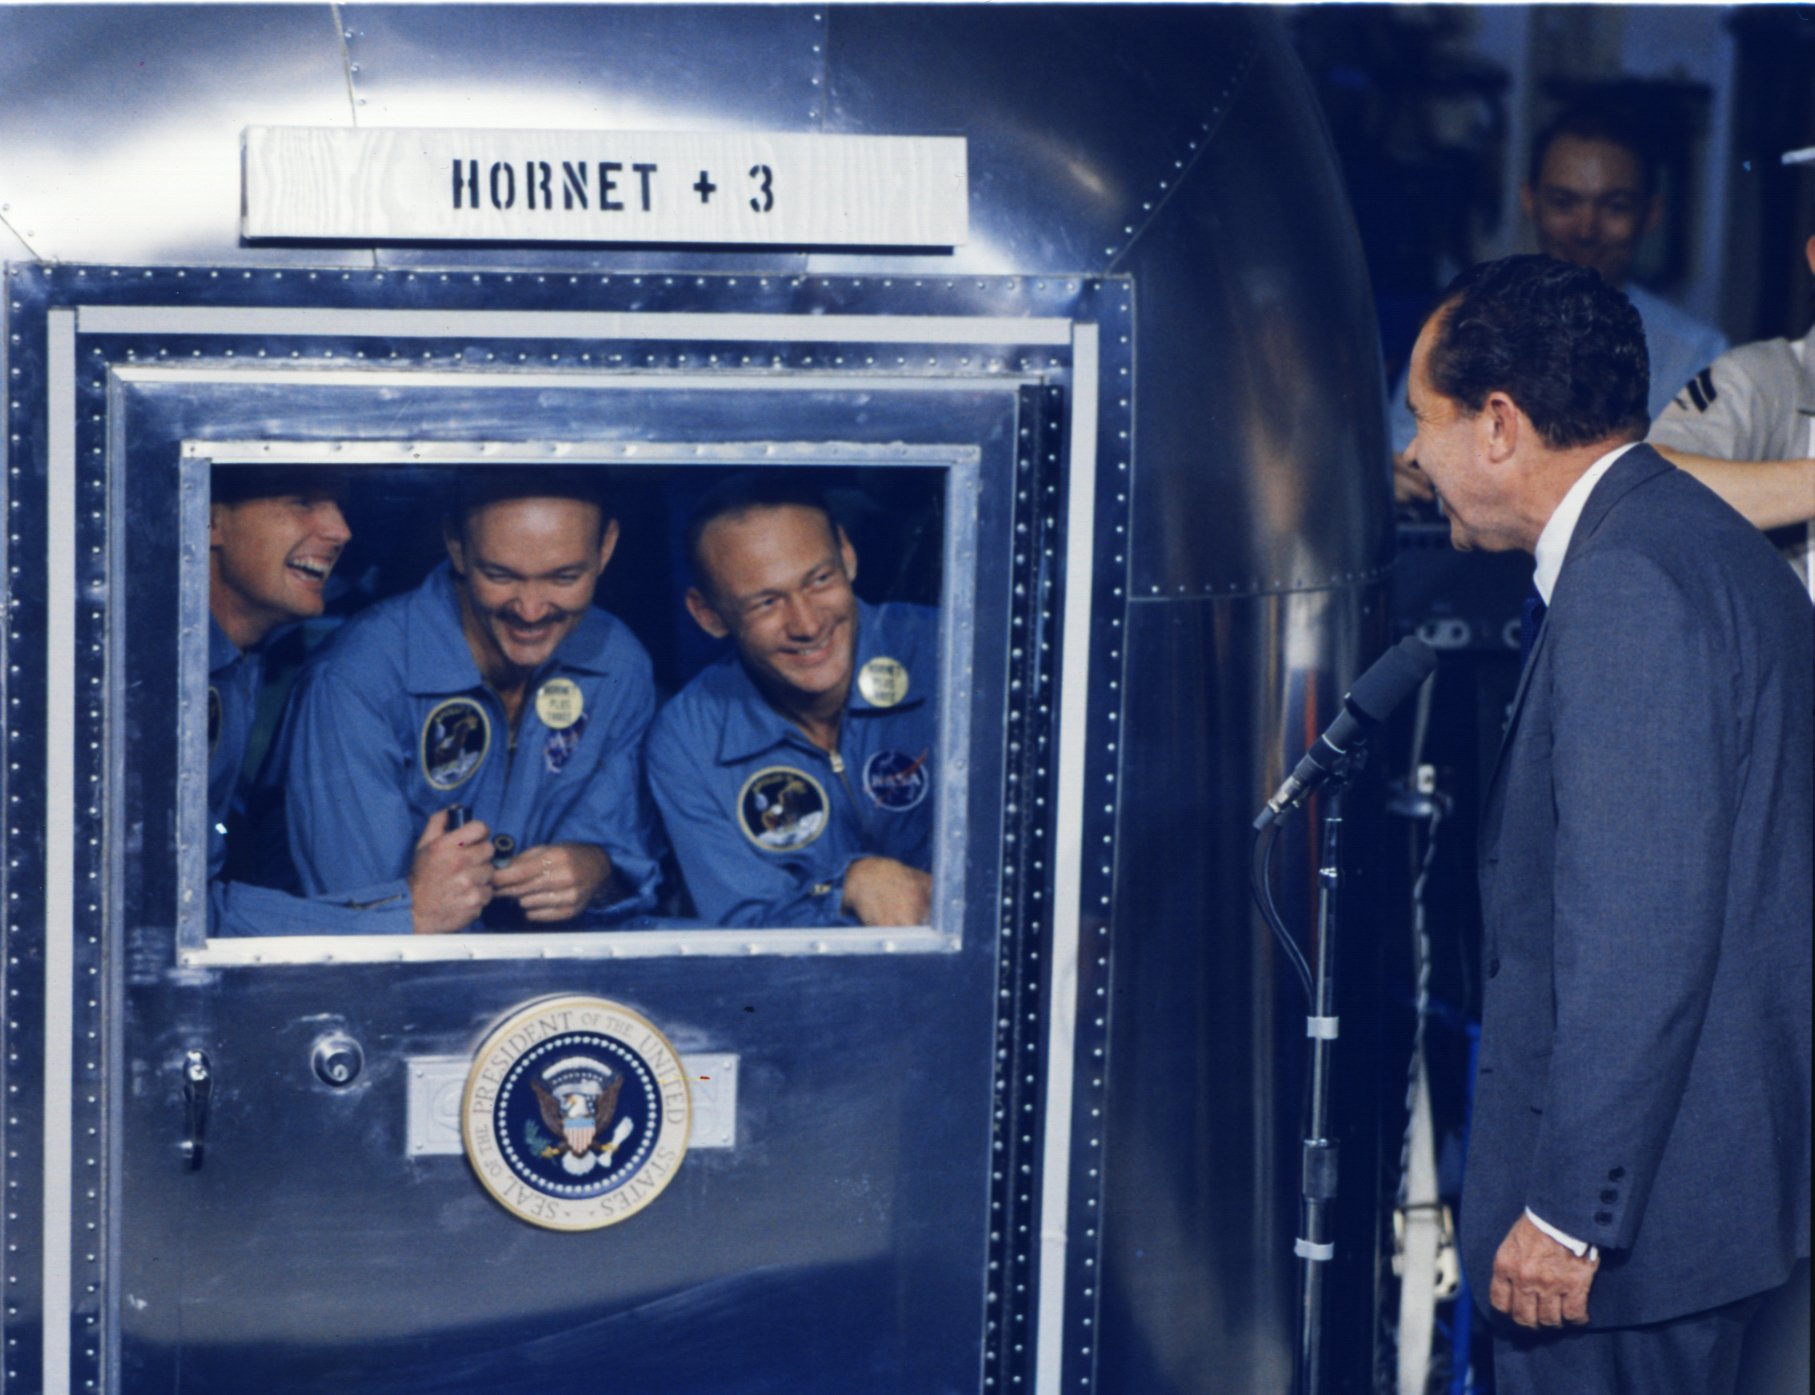 U.S. President Richard M. Nixon greets the Apollo 11 astronauts locked in a biological protection wagon on board of USS Hornet in the Pacific Ocean on July 24, 1969.